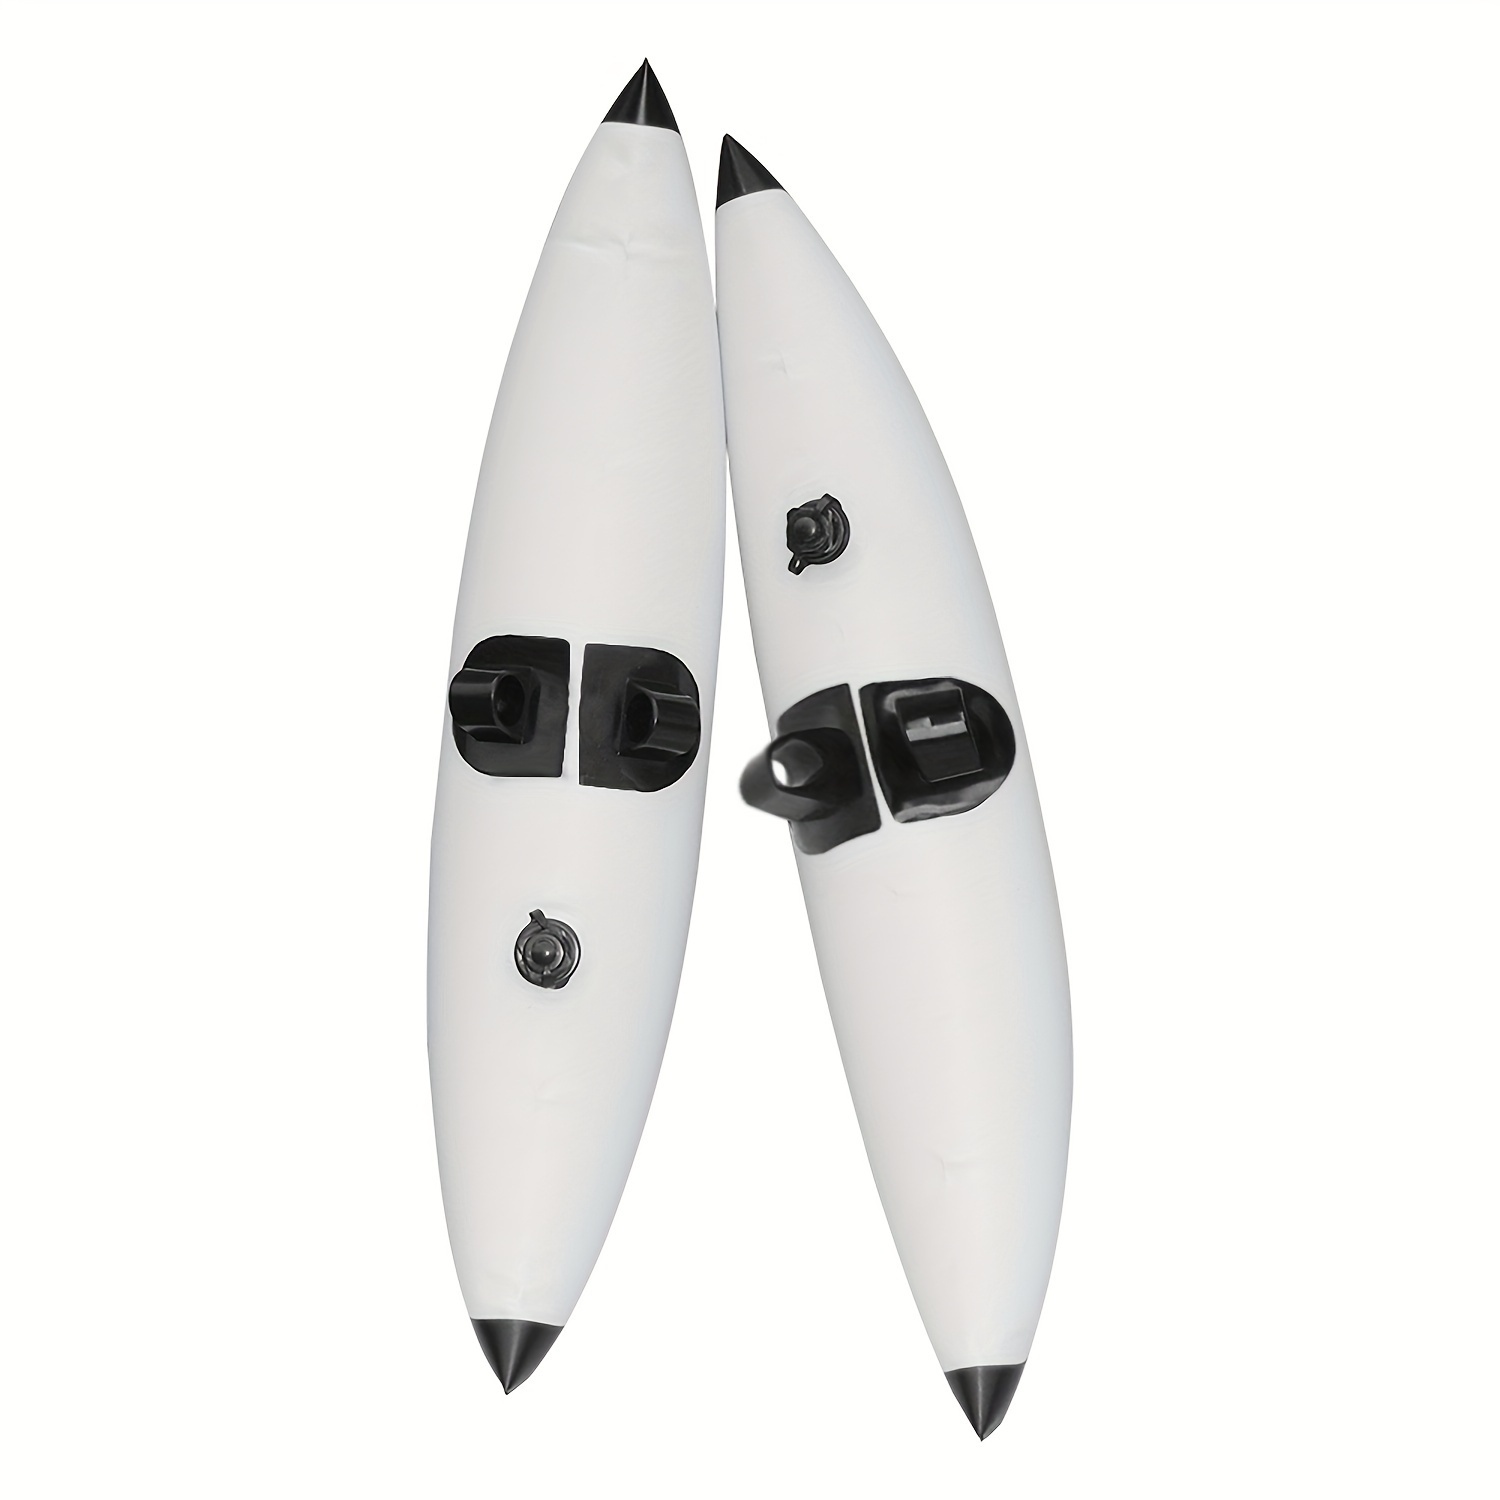 

2 Pieces Kayak , Kayak Floating Barrels, Standing System, Water Kayak Floats Buoy, Easy To Install, For Floating Balancing Boat